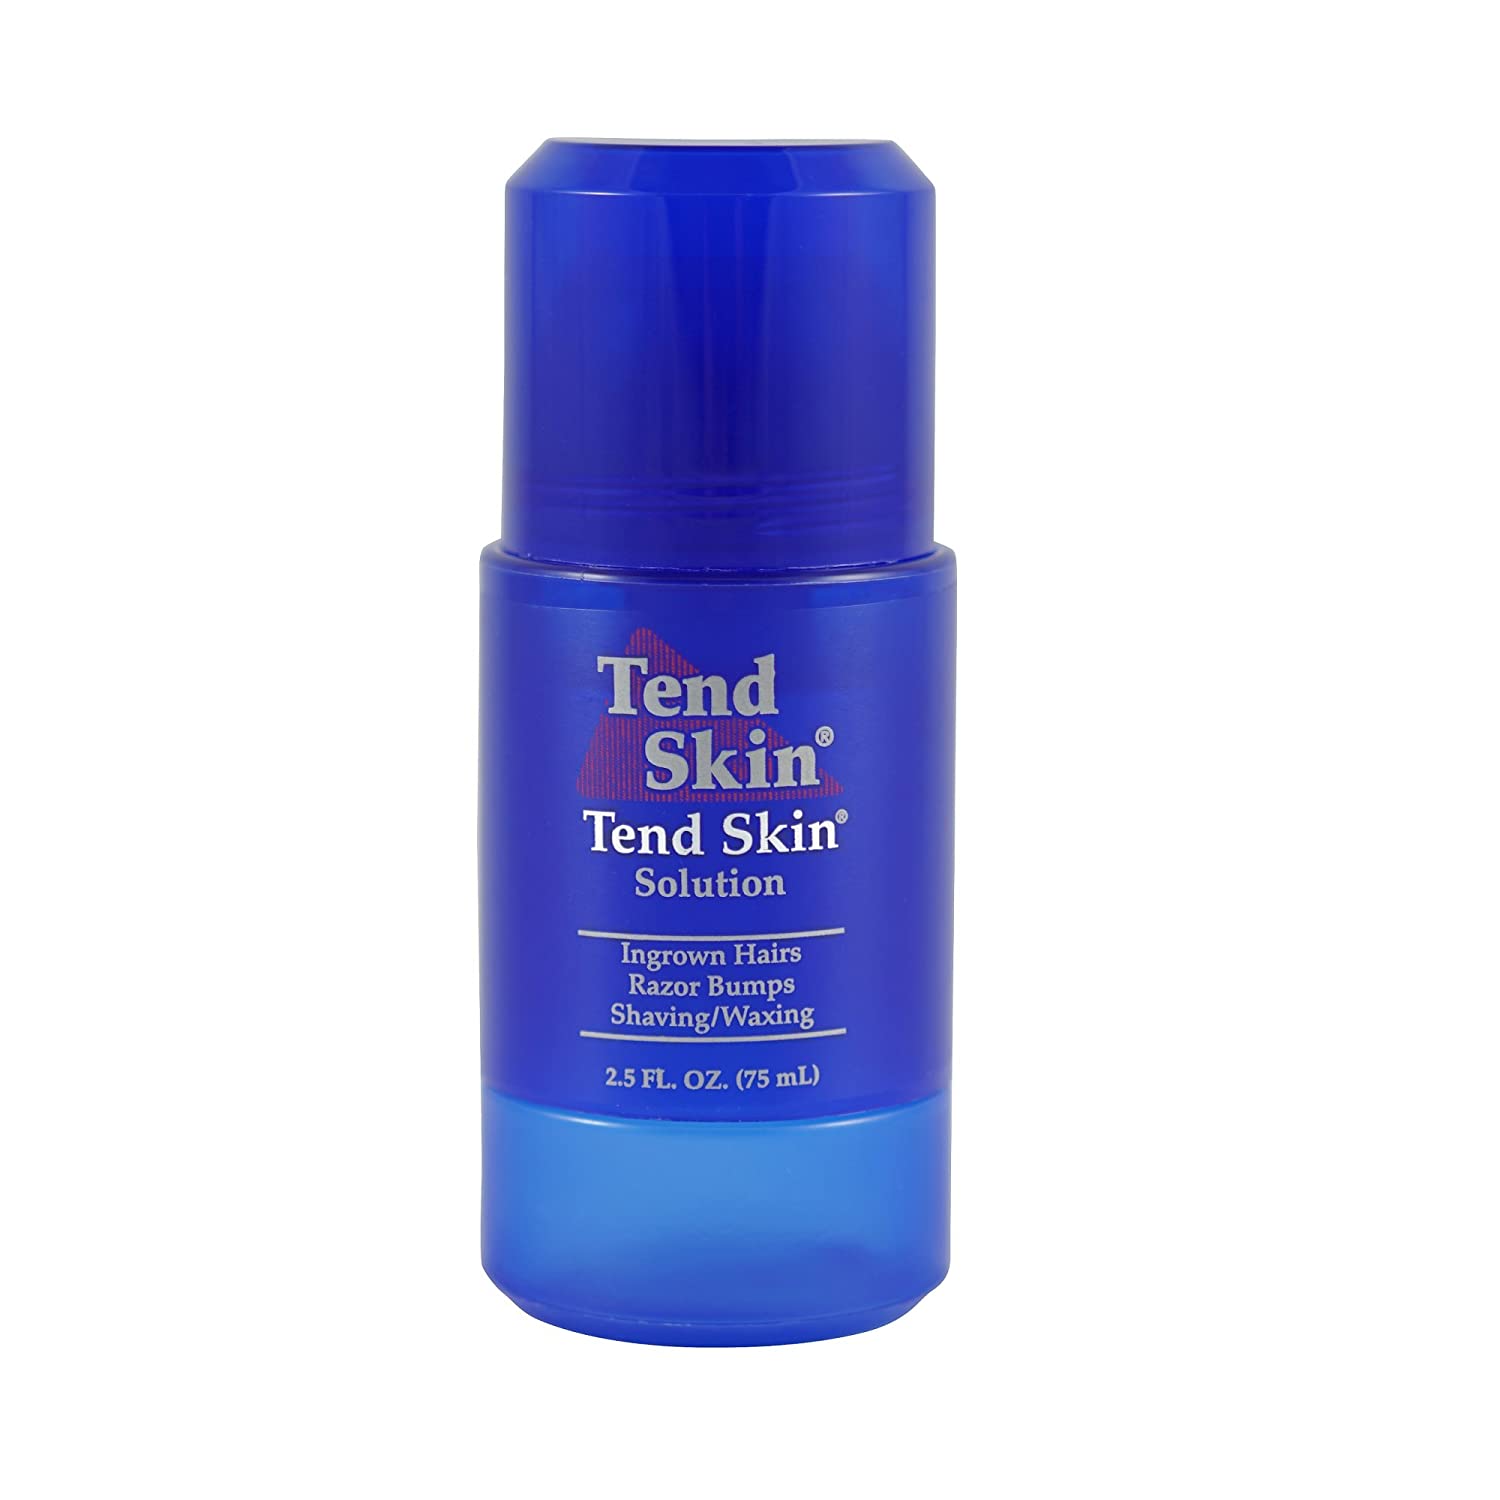 Tend Skin: Saving My Armpits One Day at a Time